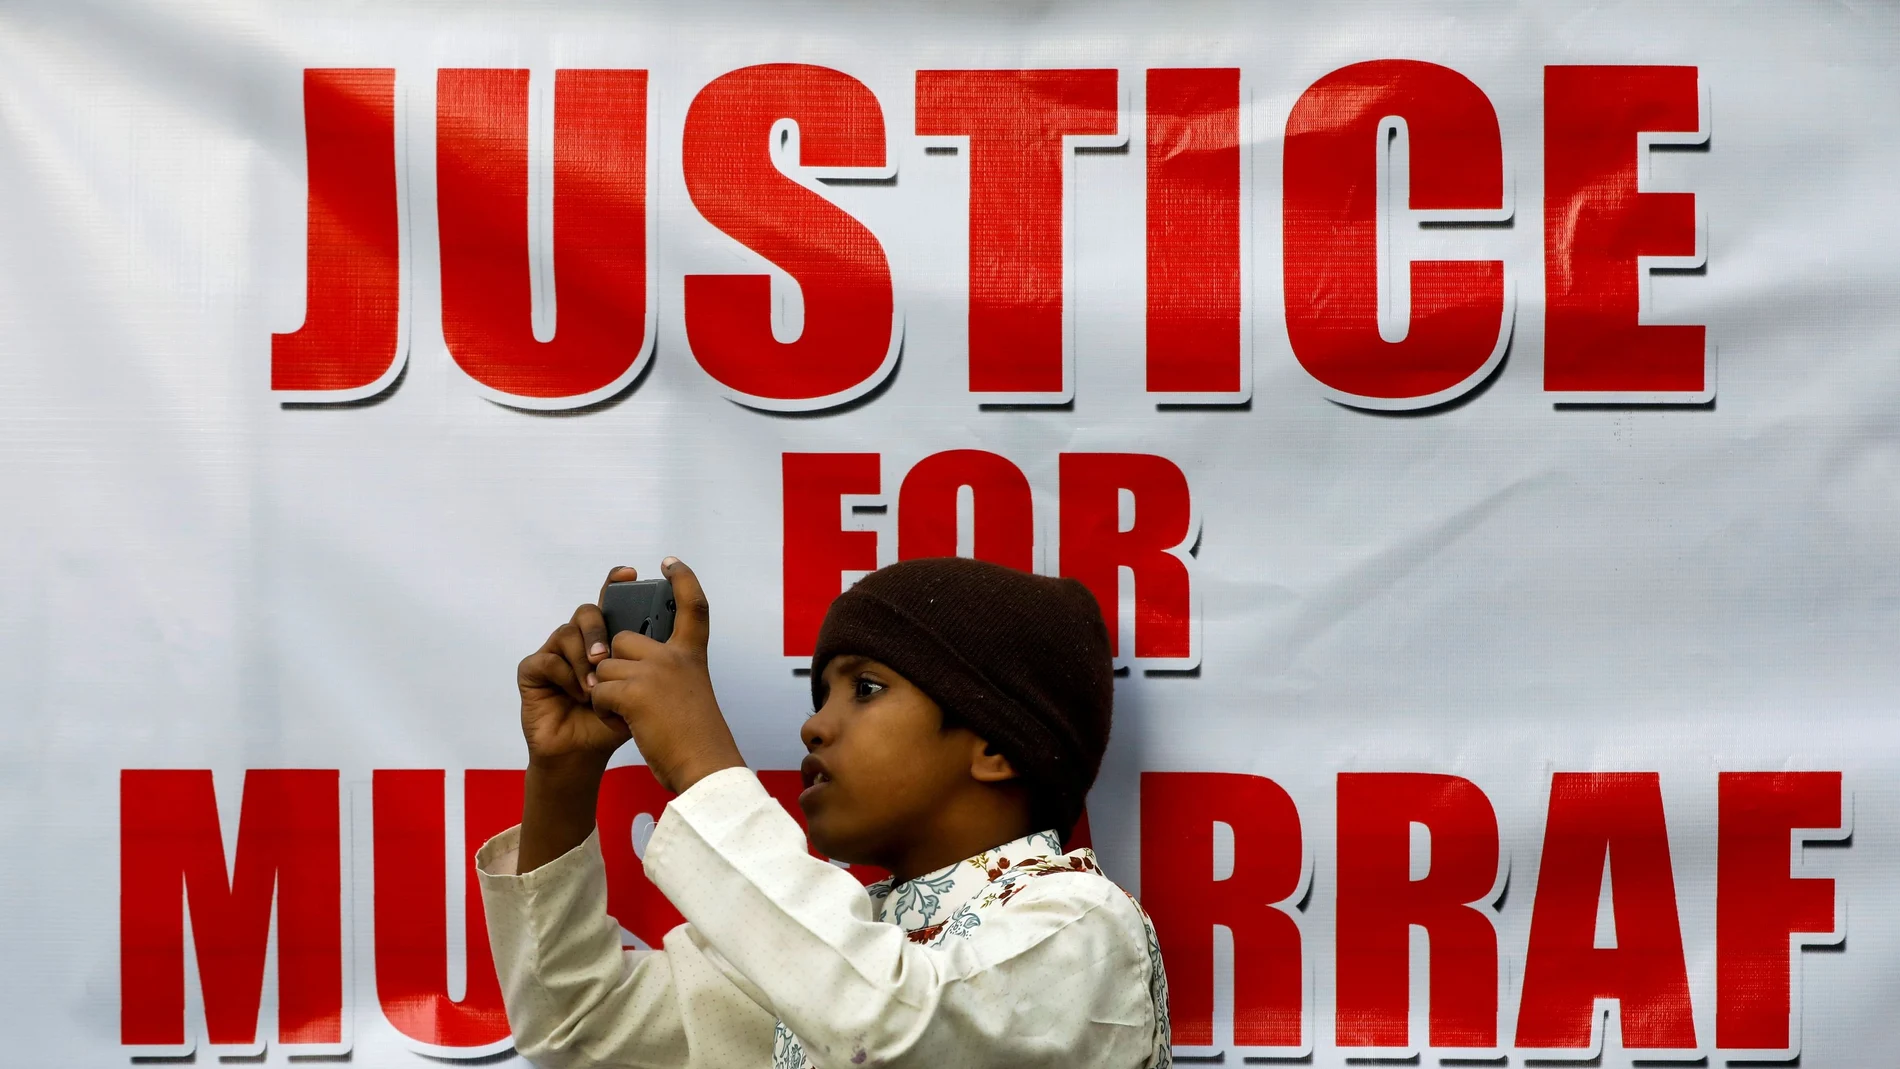 FILE PHOTO: A boy leans on a sign as he films the supporters of Pervez Musharraf, after a Pakistani court sentenced the former military ruler to death on charges of high treason and subverting the constitution, during a protest in Karachi